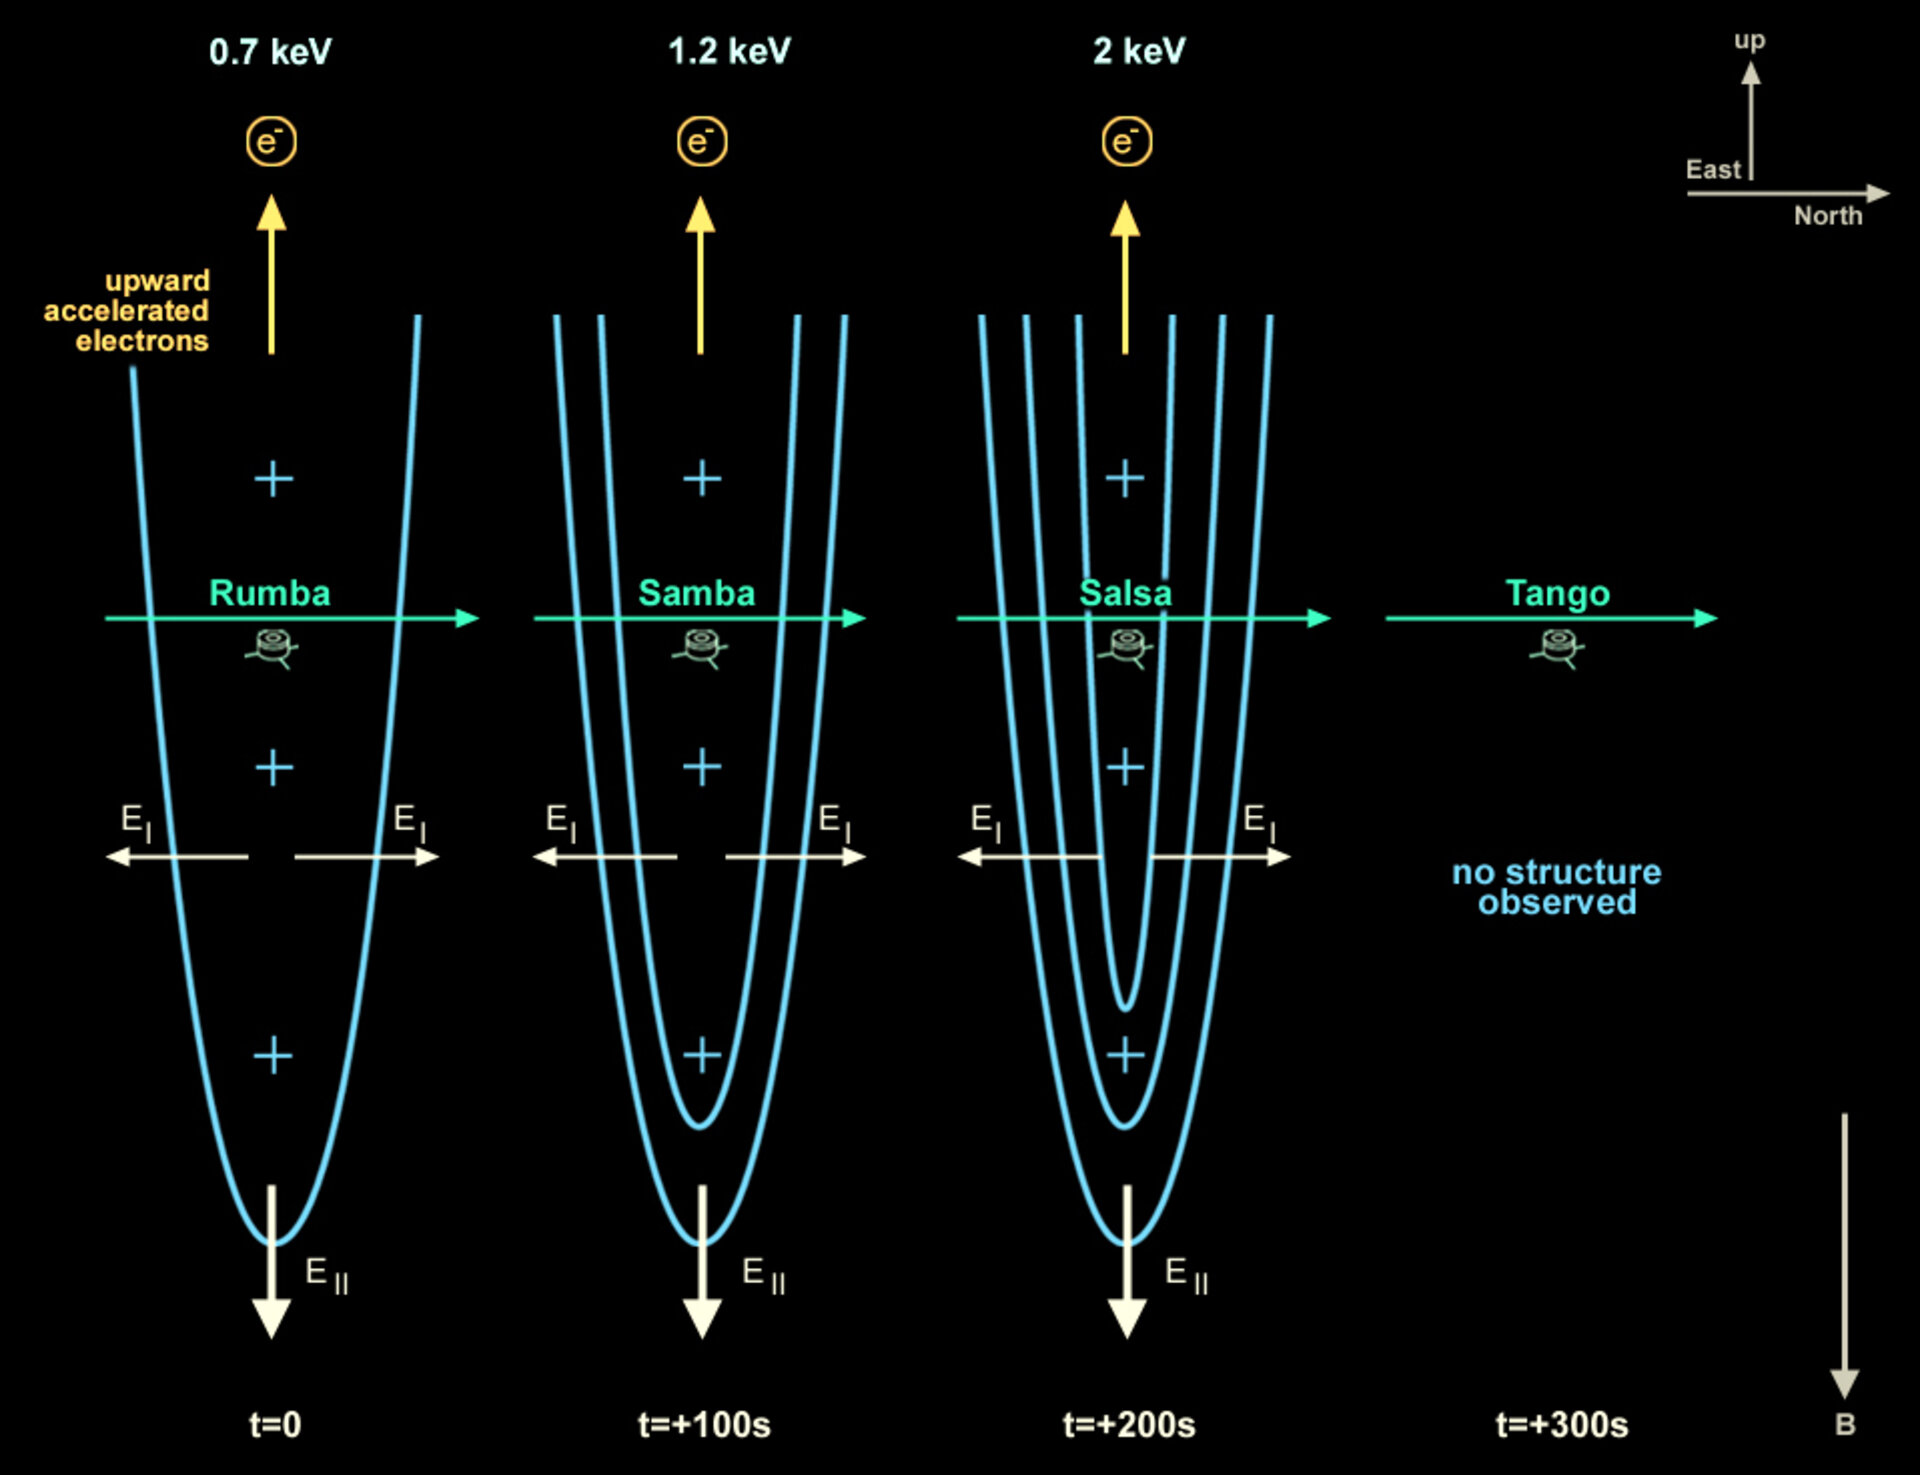 Three of the four Cluster spacecraft found indications for changes in the magnetosphere